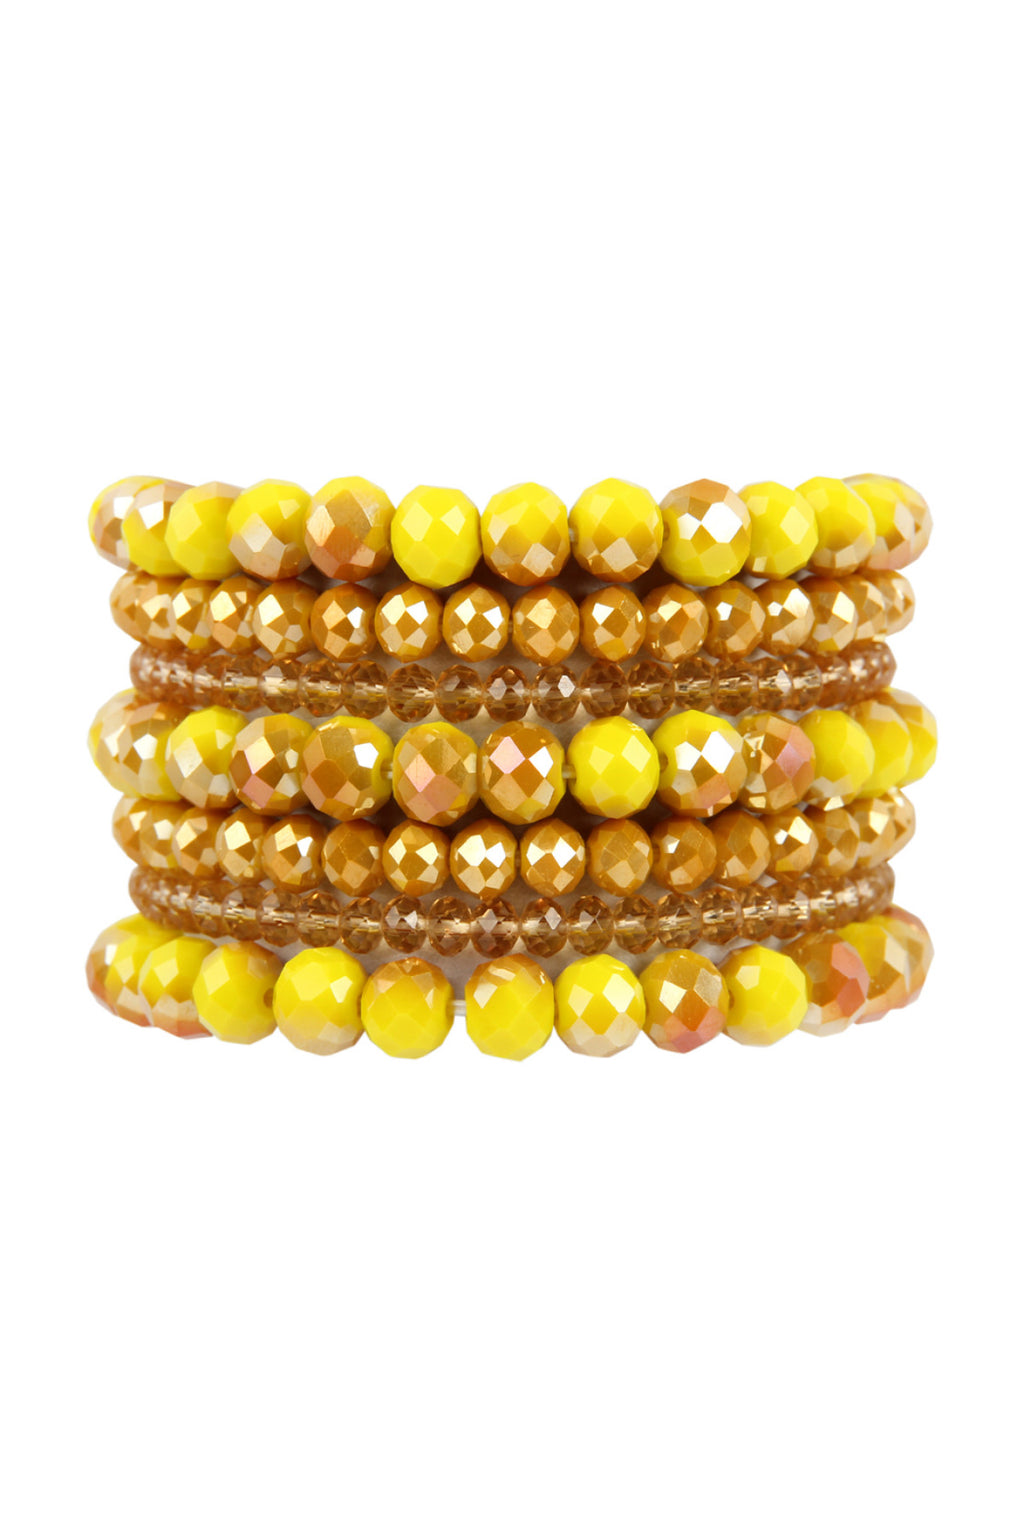 Mustard Seven Lines Glass Beads Stretch Bracelet - Pack of 6